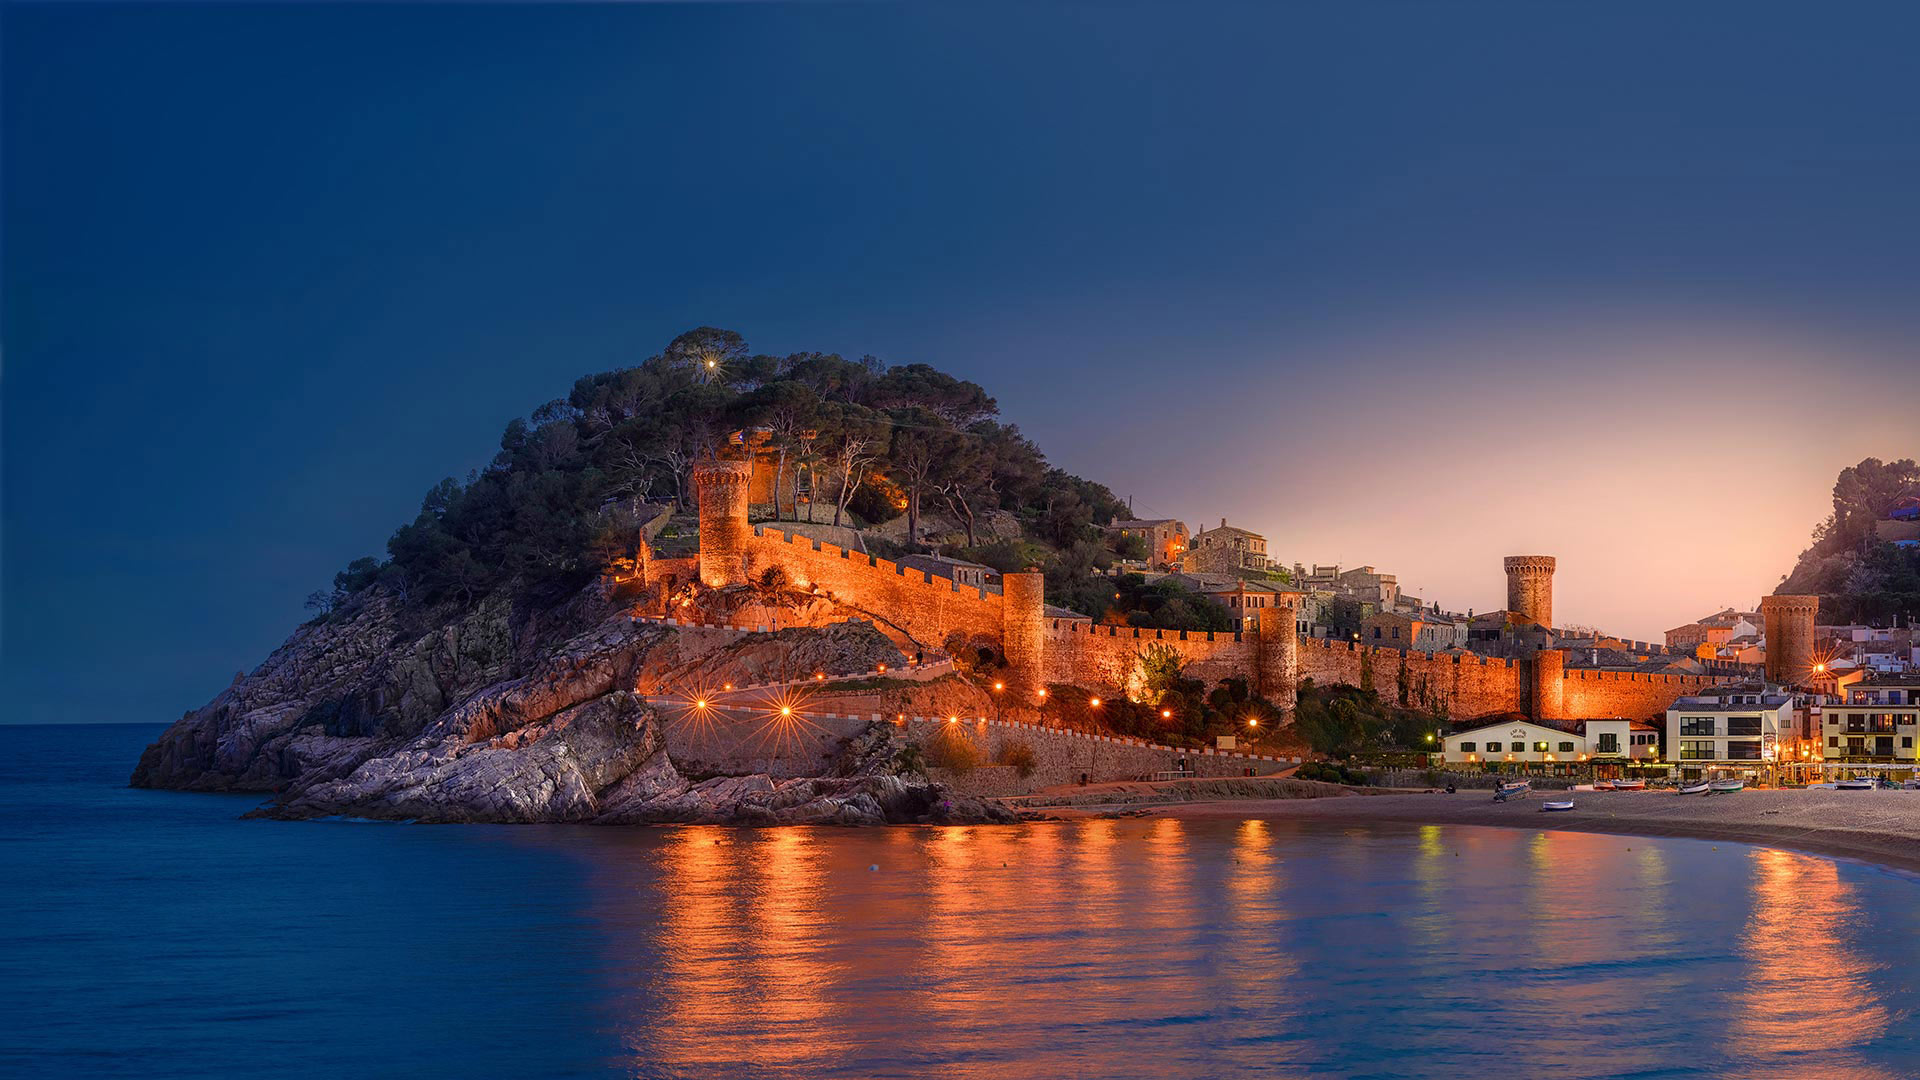 The medieval walled town in Tossa de Mar, Catalonia, Spain - dleiva/Alamy)